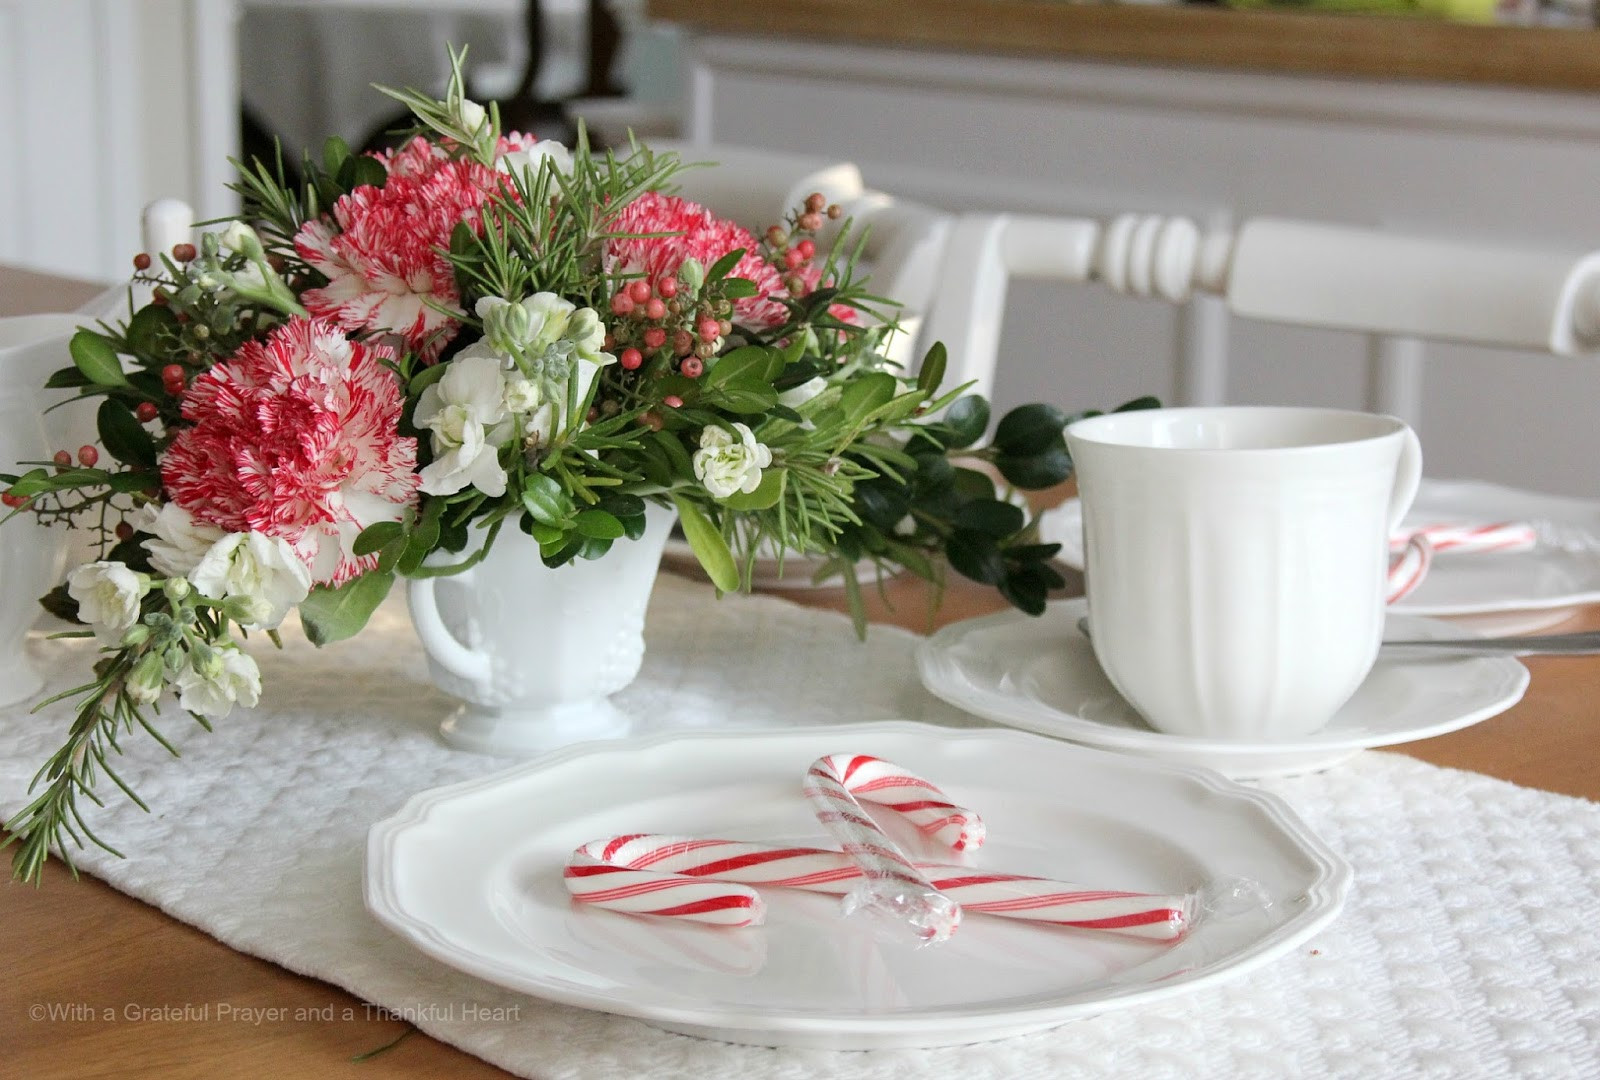 Christmas Table Flower Arrangements
 How to Make a Floral Christmas Centerpiece